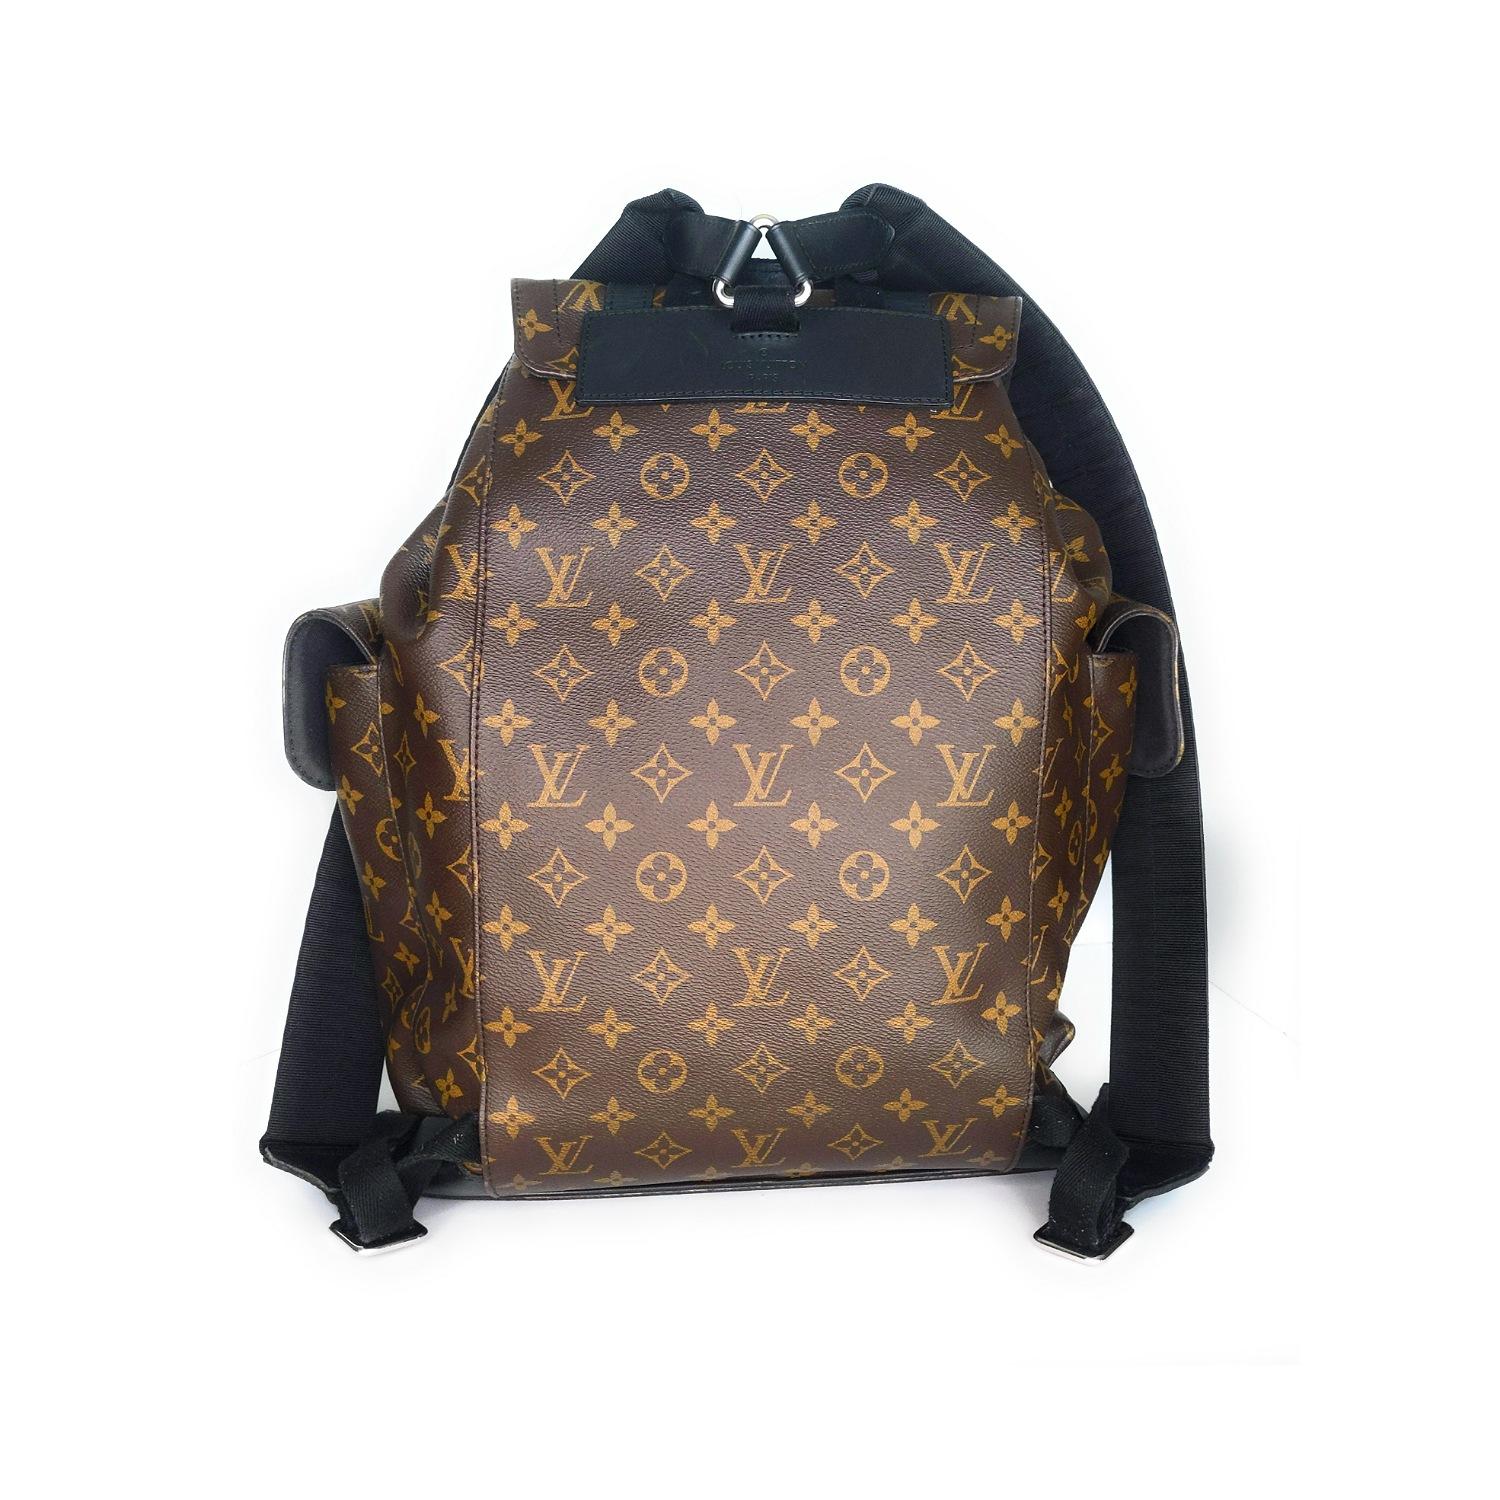 The Christopher PM backpack conjures up the rugged spirit of a hiking pack in Monogram canvas. It's equally chic at work and play and evokes a fine lifestyle. 

Brand: Louis Vuitton
Material: Monogram Macassar canvas w/ cowhide